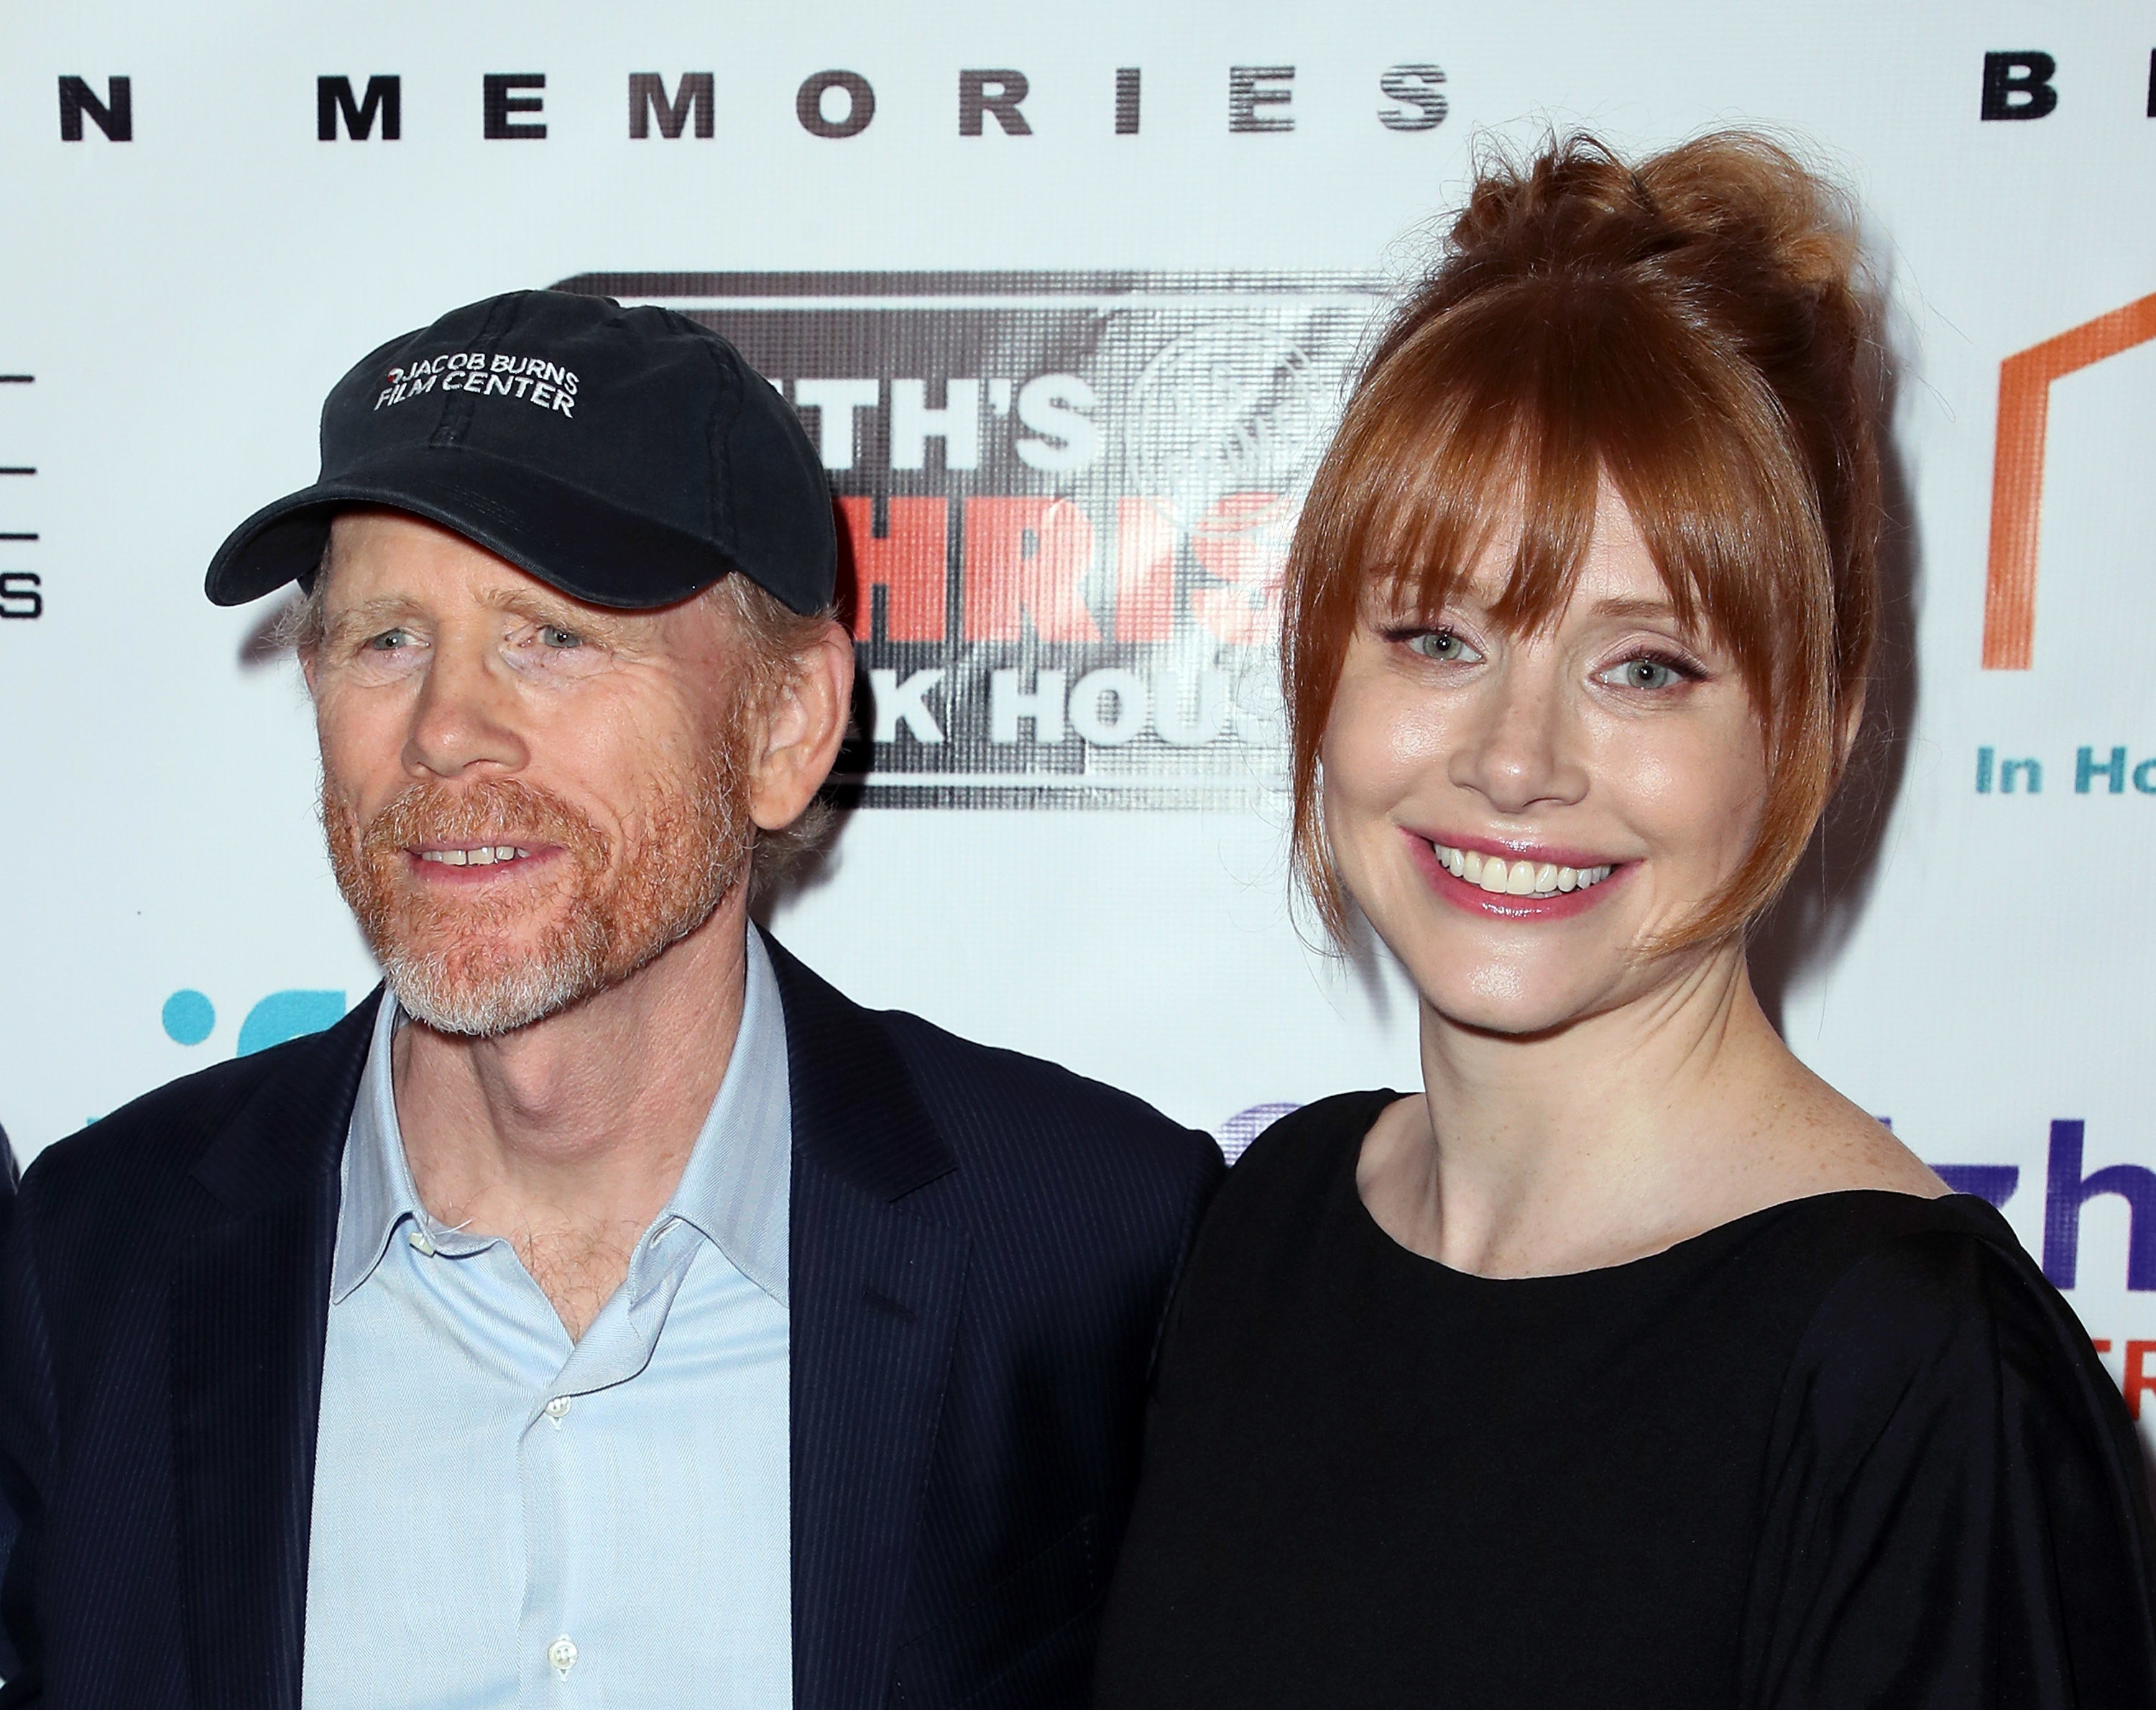 Ron Howard and Bryce Dallas Howard on a red carpet